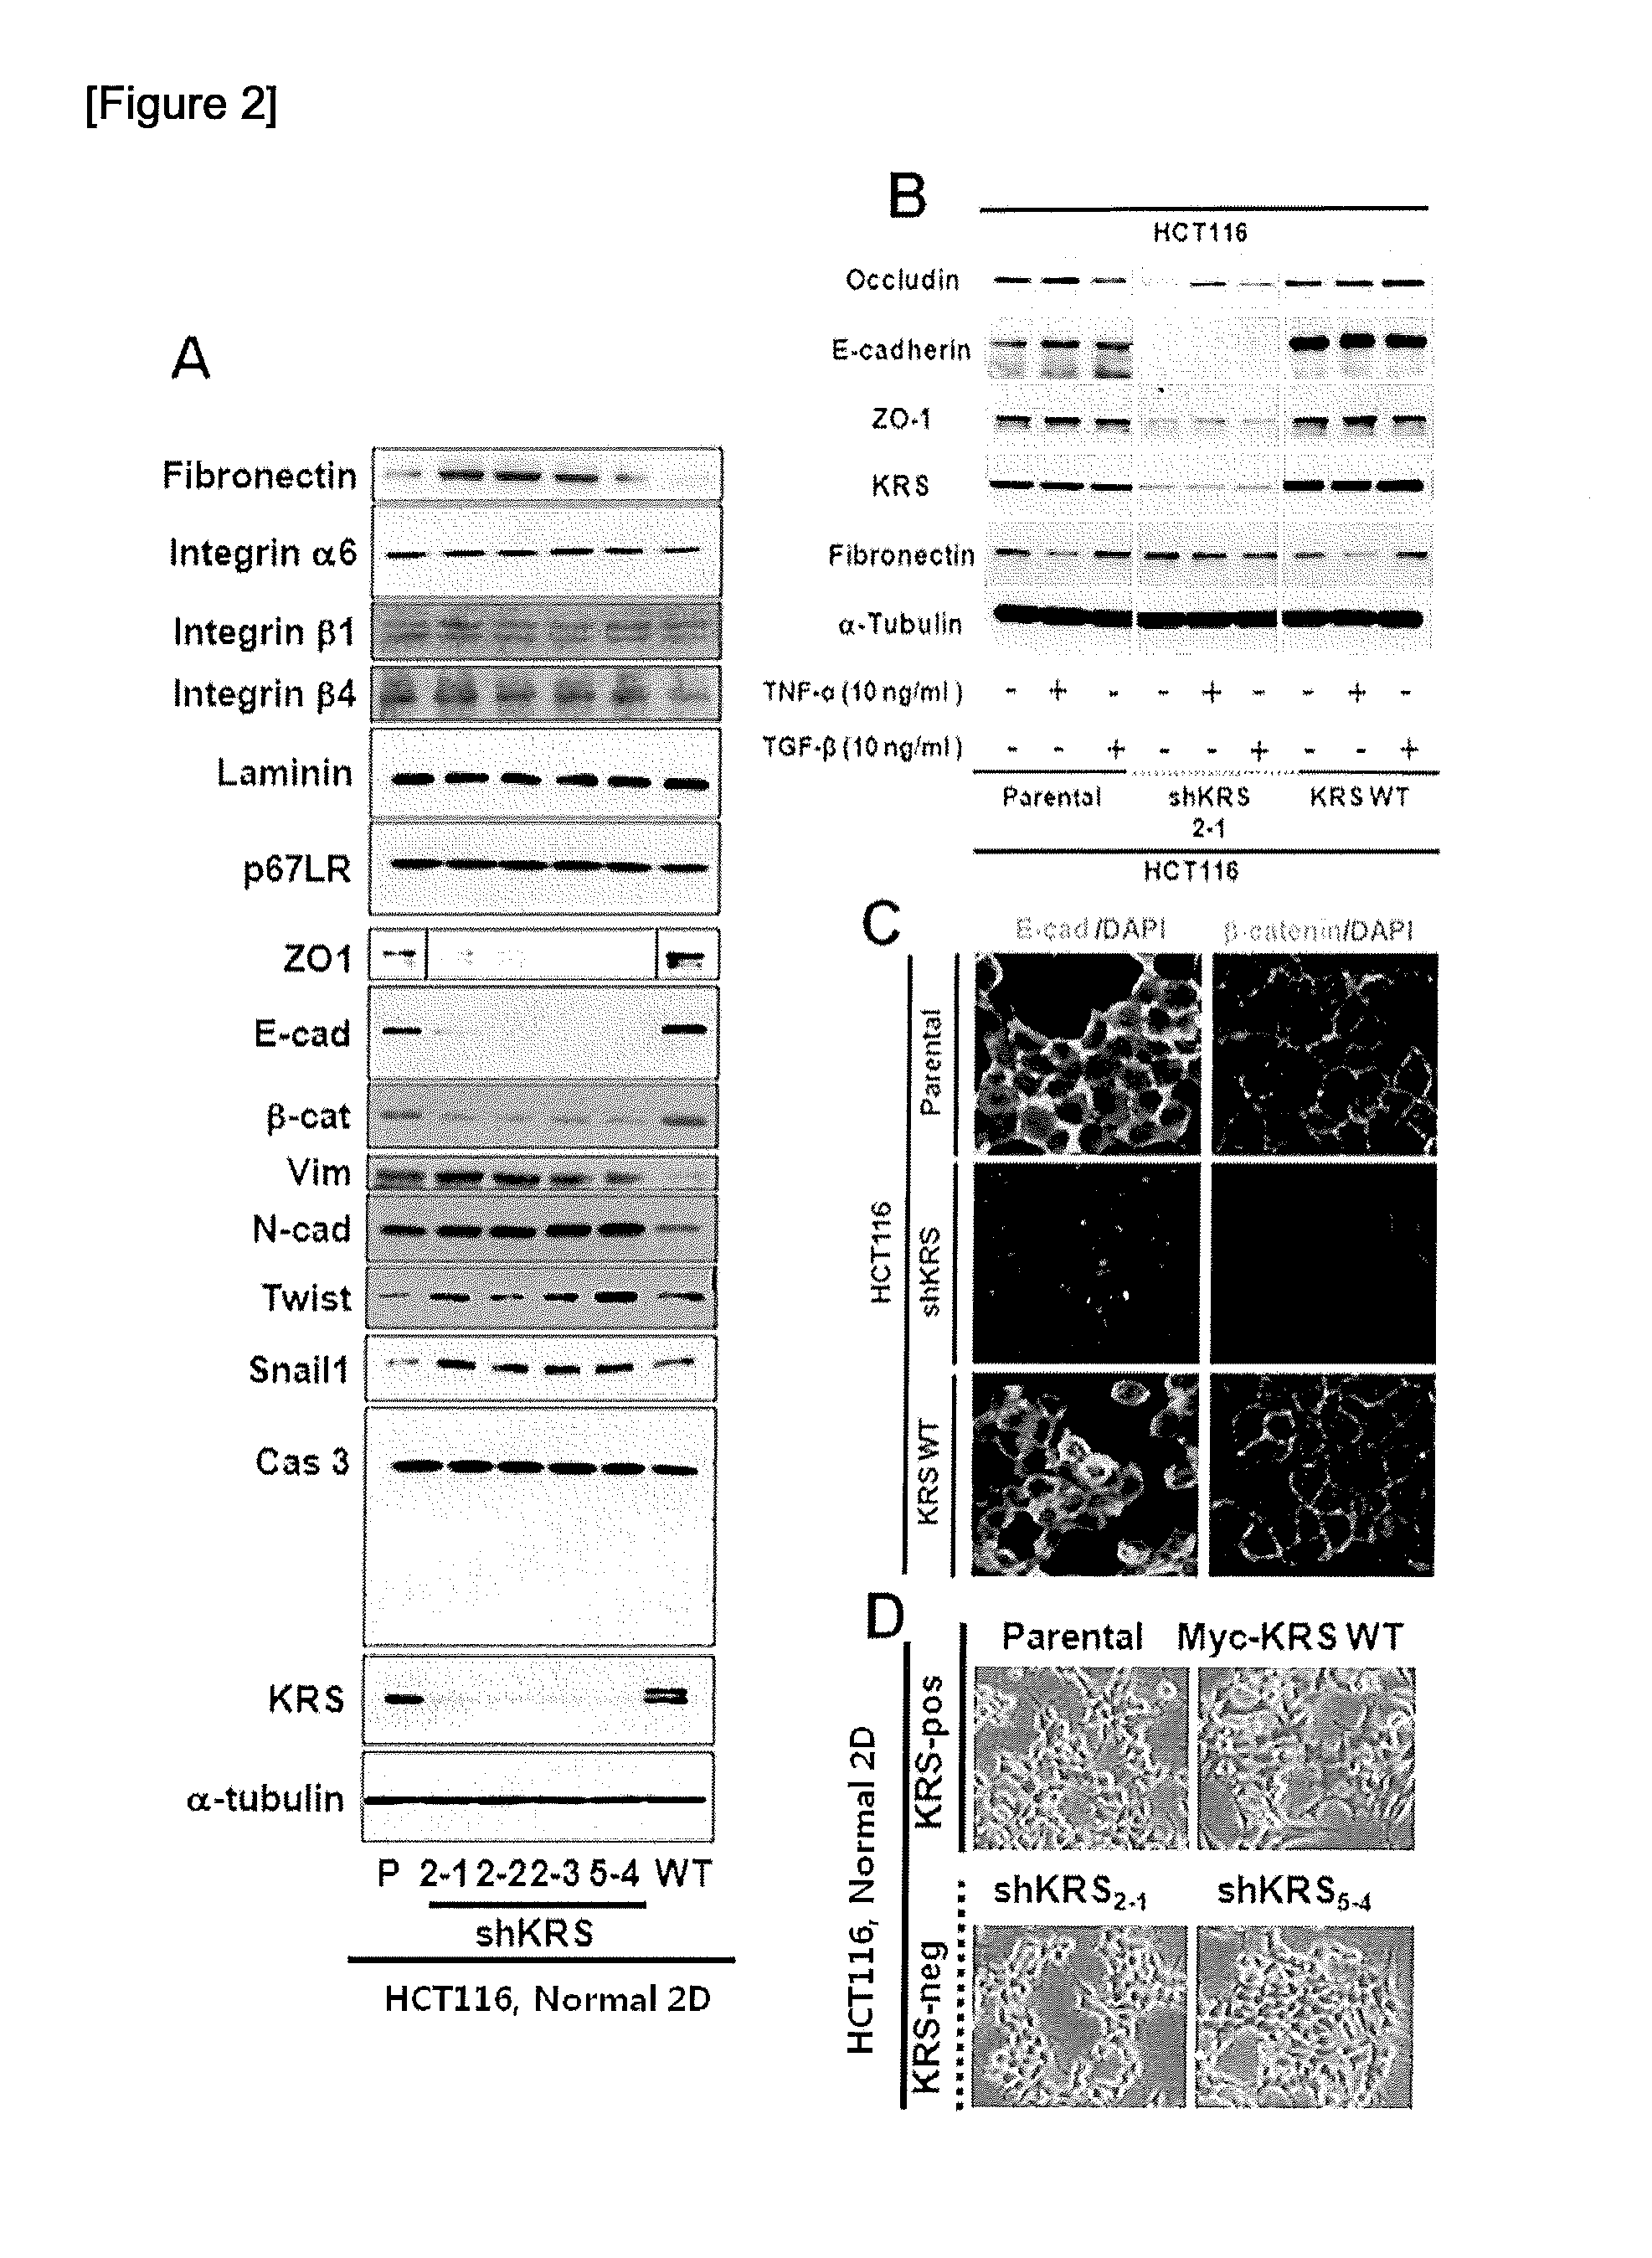 Method for screeing cancer metastasis inhibitor using culture of cells or spheroidically aggregated cells in which lysyl-trna synthetase is regulated to be expressed or unexpressed